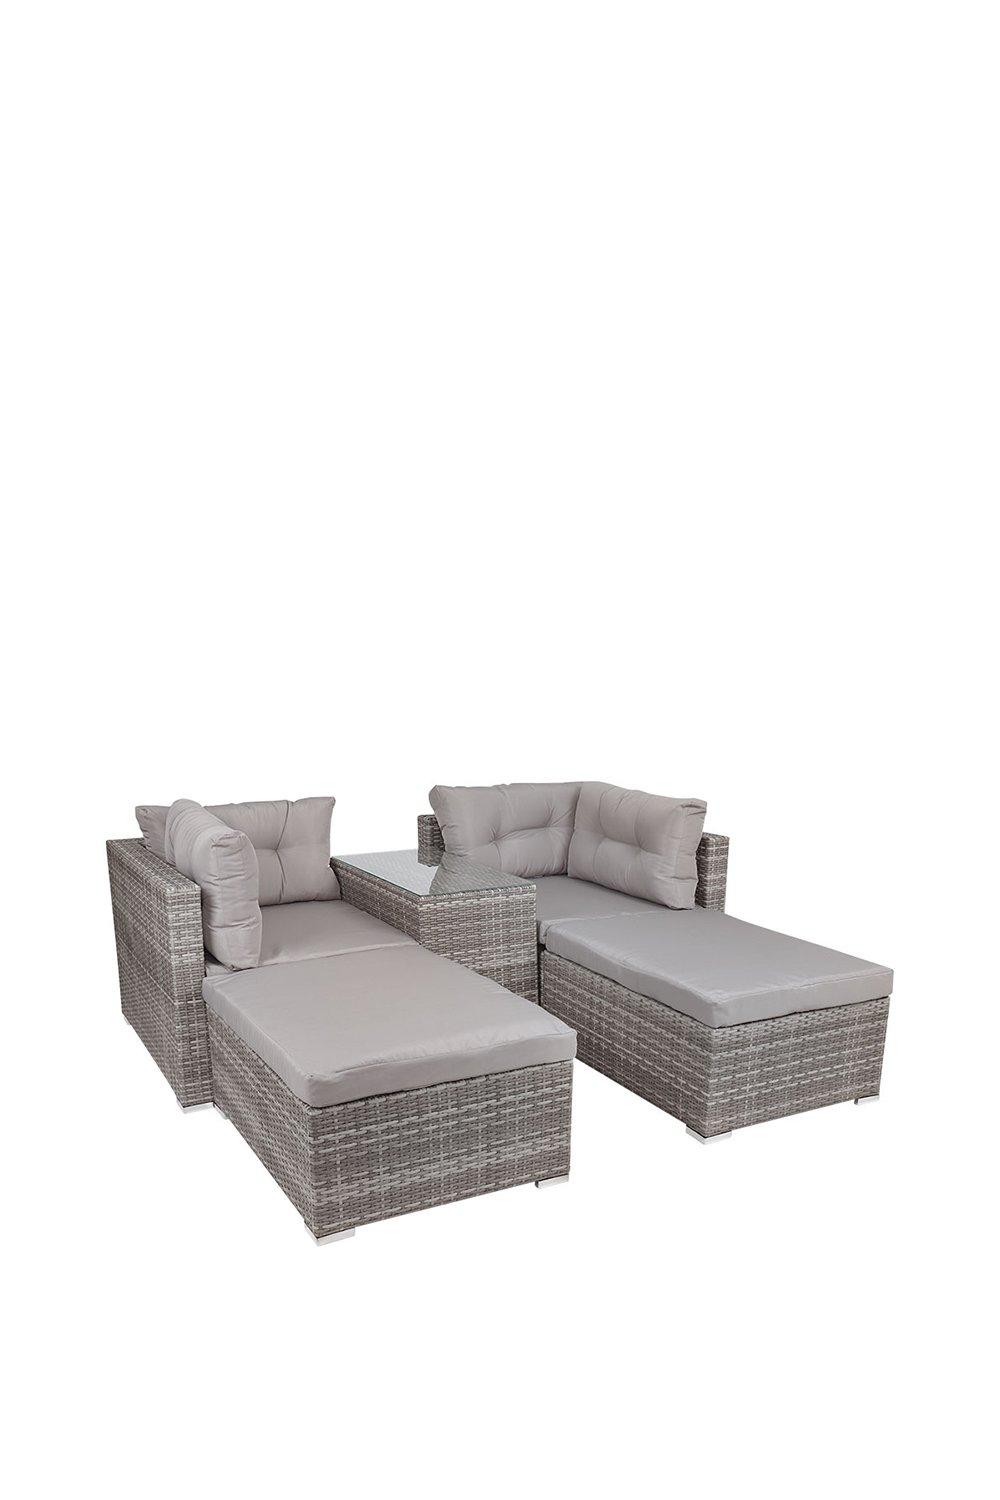 Luxury Grey Wicker Rattan Sofa Cube Garden Furniture Lounger Set With Glass Top Coffee Table